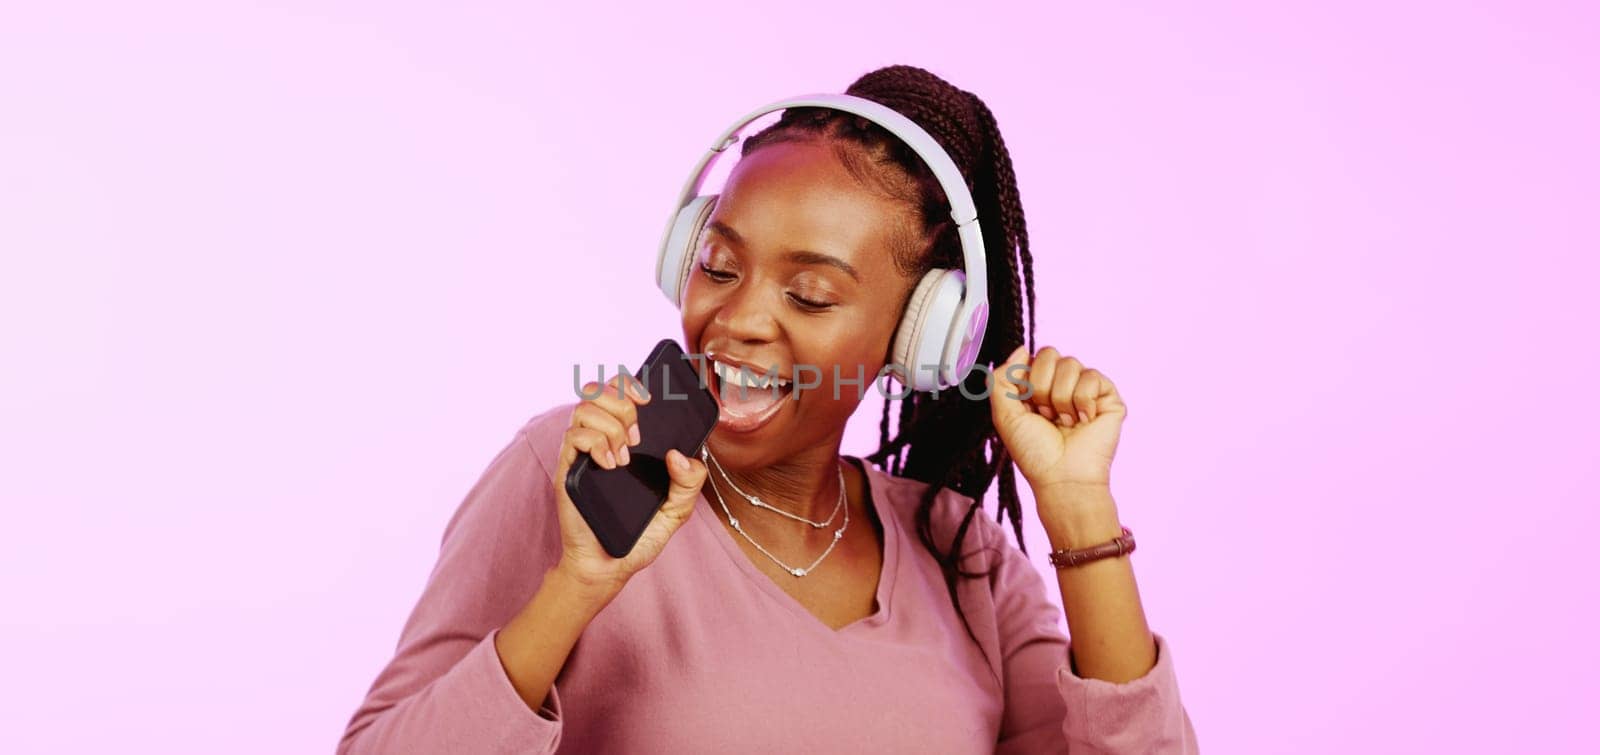 Sing, dance and black woman with headphones music microphone isolated on a studio background. Fun, happy and funky African girl listening to audio, radio or songs while singing and dancing on a backd.